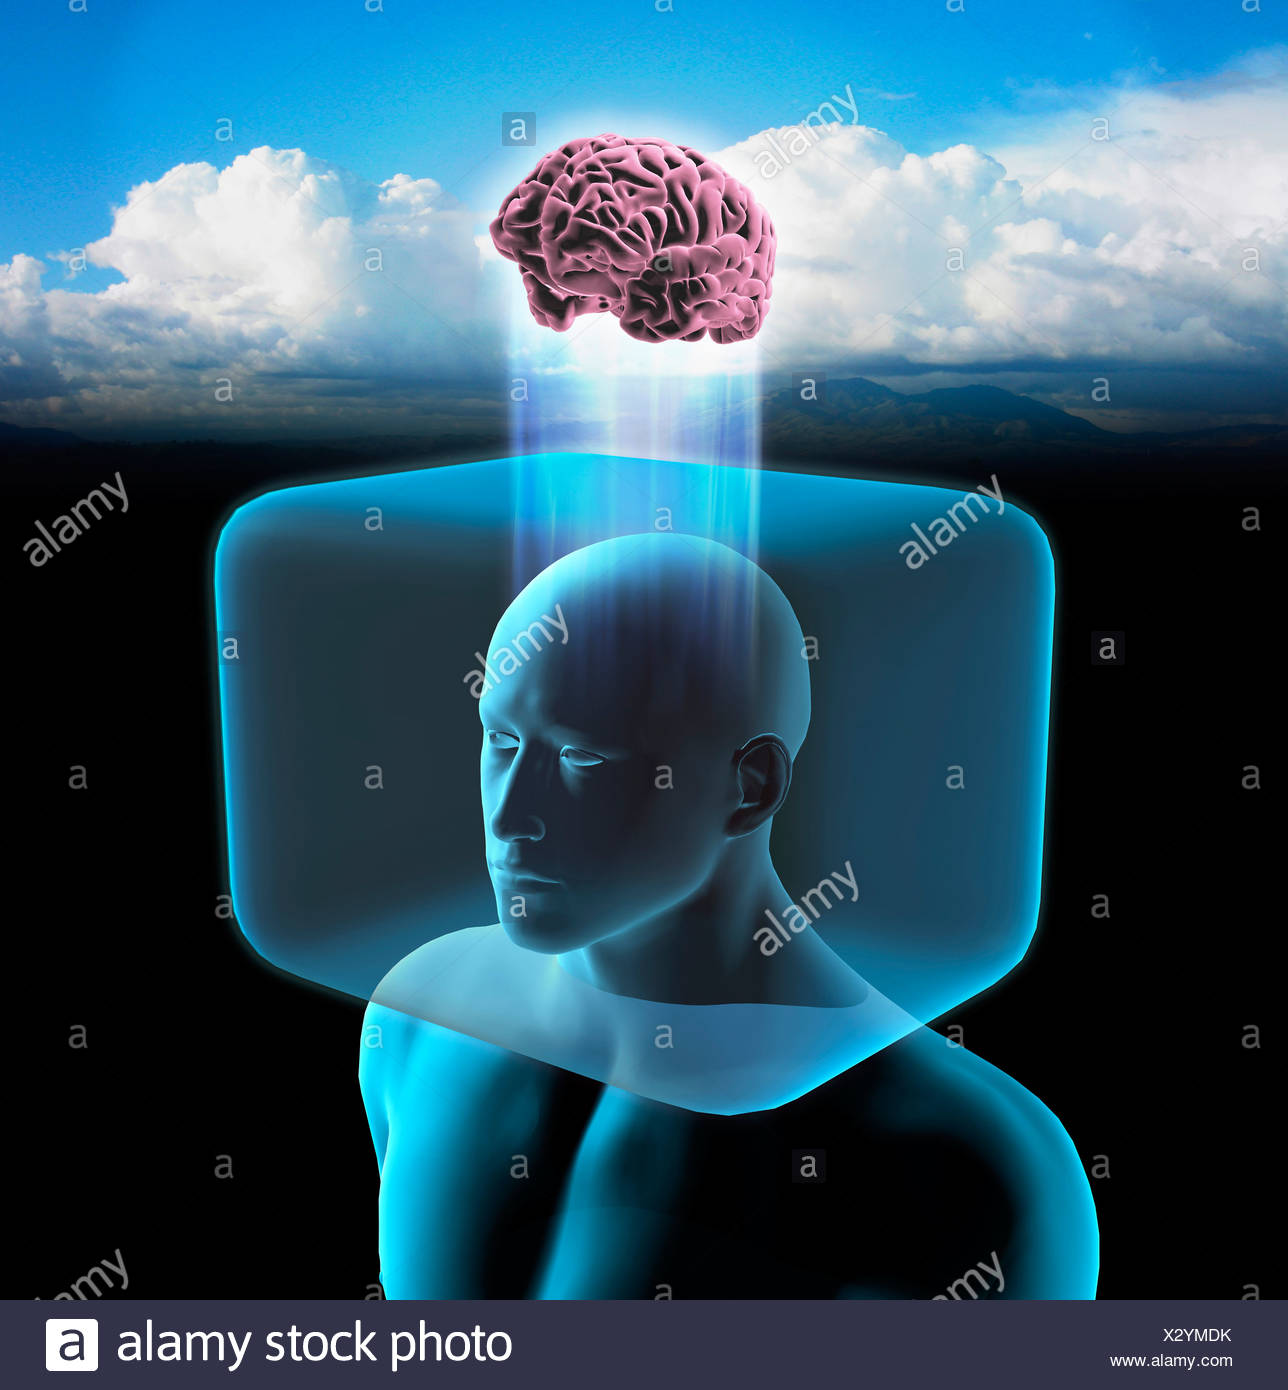 blue-man-with-head-inside-cage-and-brain